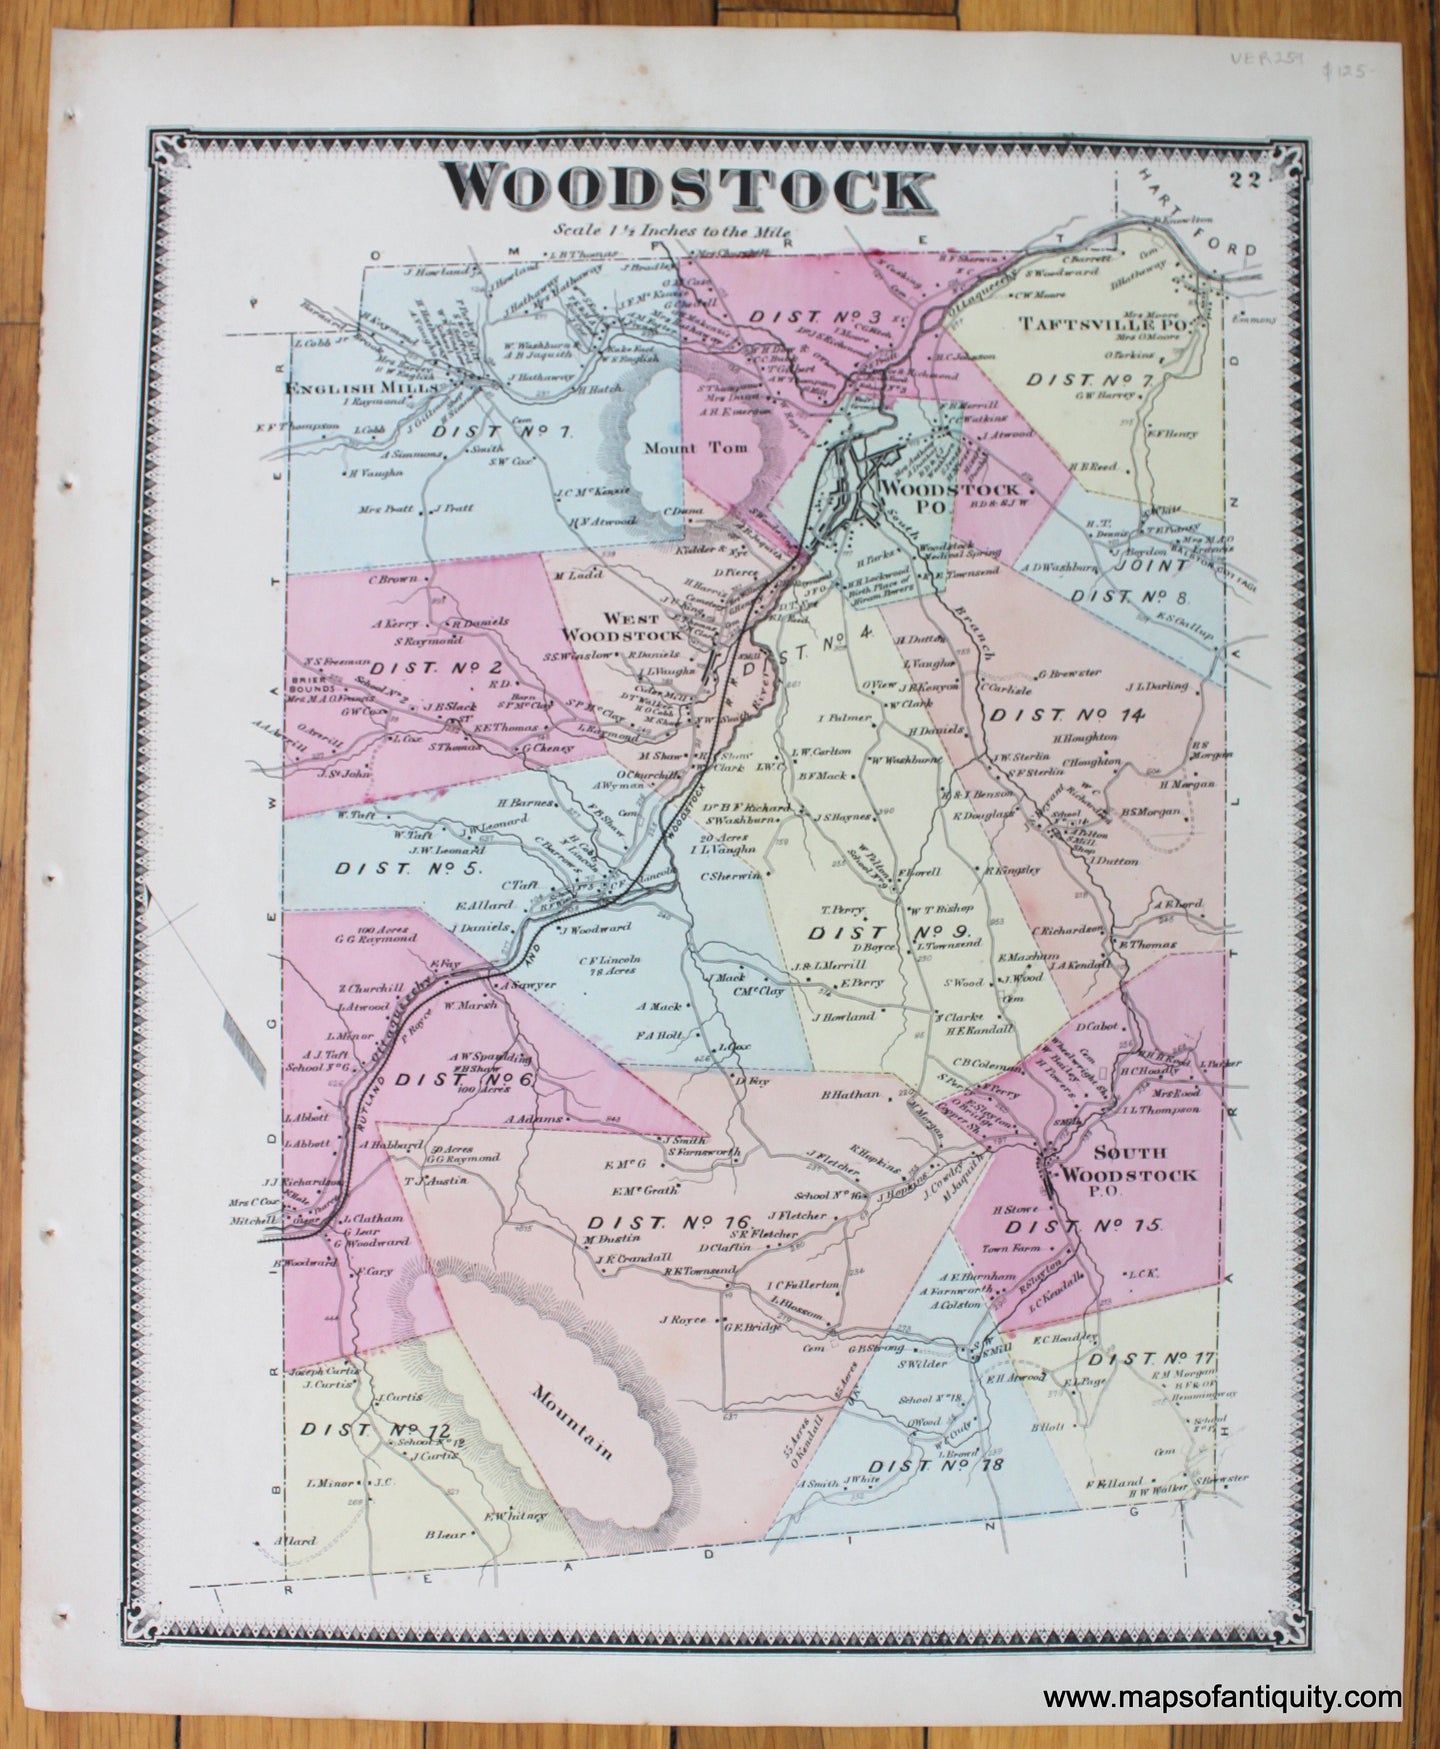 Antique-Hand-Colored-Map-Woodstock-VT-1869-Beers-1800s-19th-century-Maps-of-Antiquity